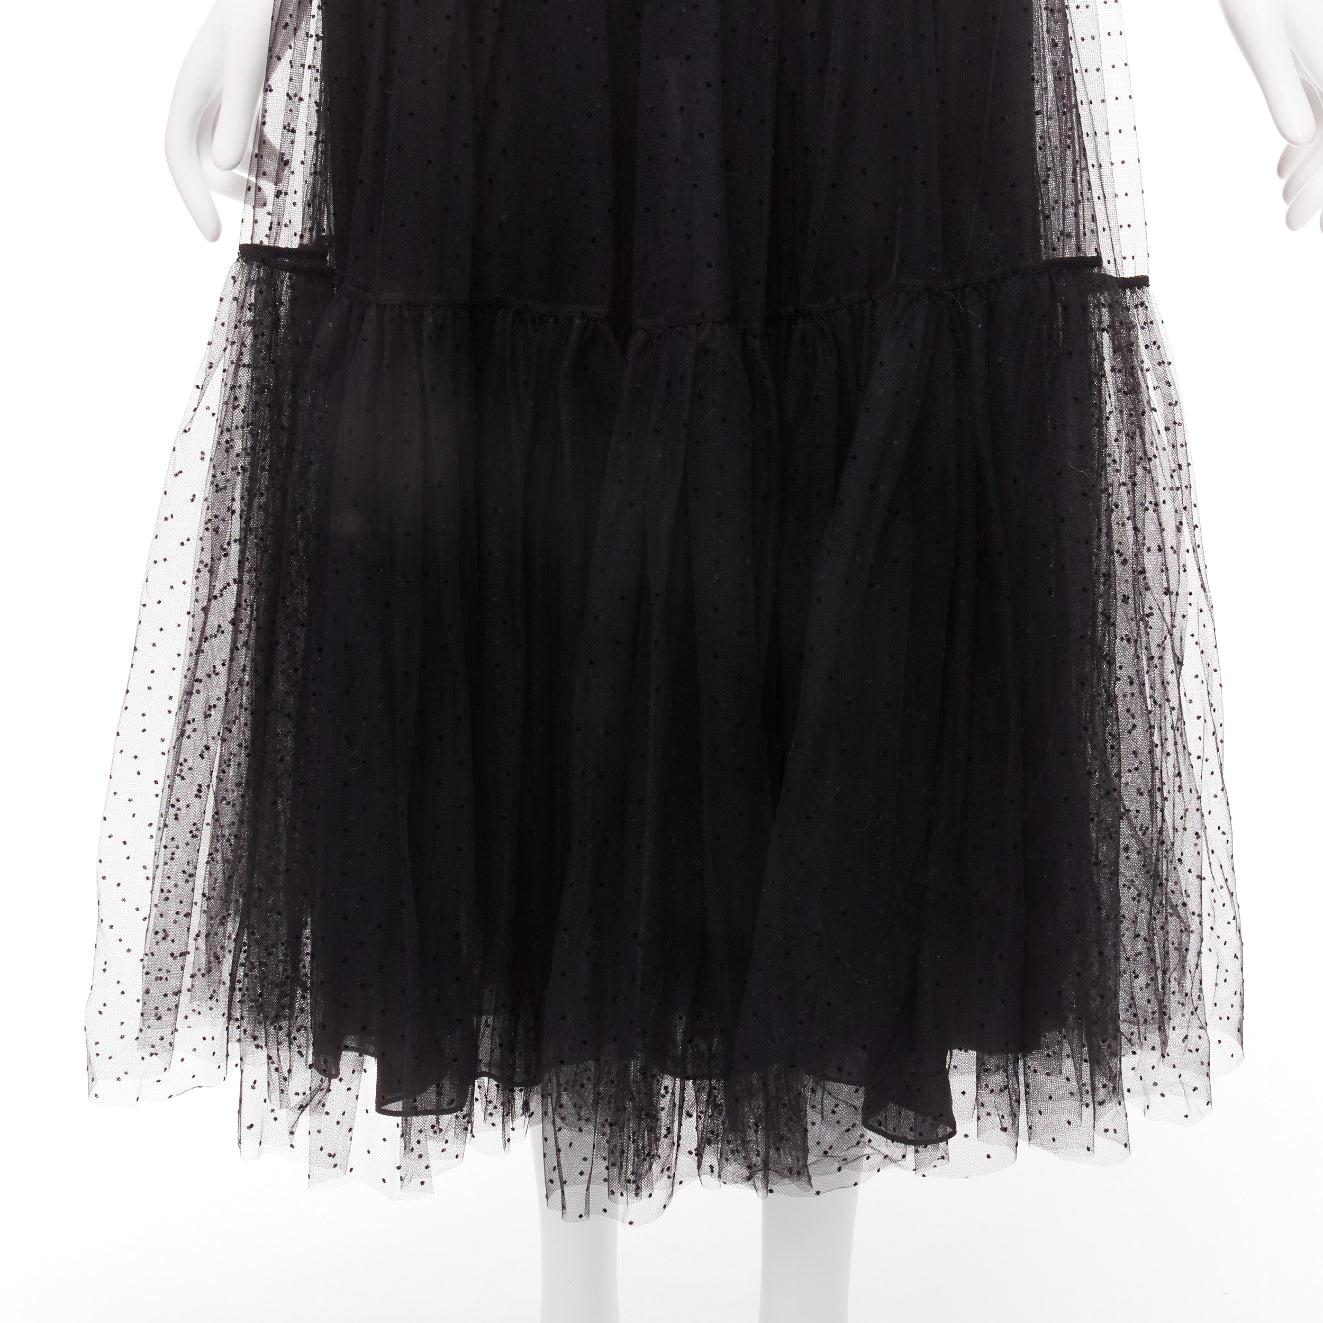 CHRISTIAN DIOR black sheer polka dot sheer tulle layered skirt S
Reference: AAWC/A00597
Brand: Christian Dior
Designer: Maria Grazia Chiuri
Material: Feels like polyester
Color: Black
Pattern: Polka Dot
Closure: Zip
Lining: Black
Extra Details: